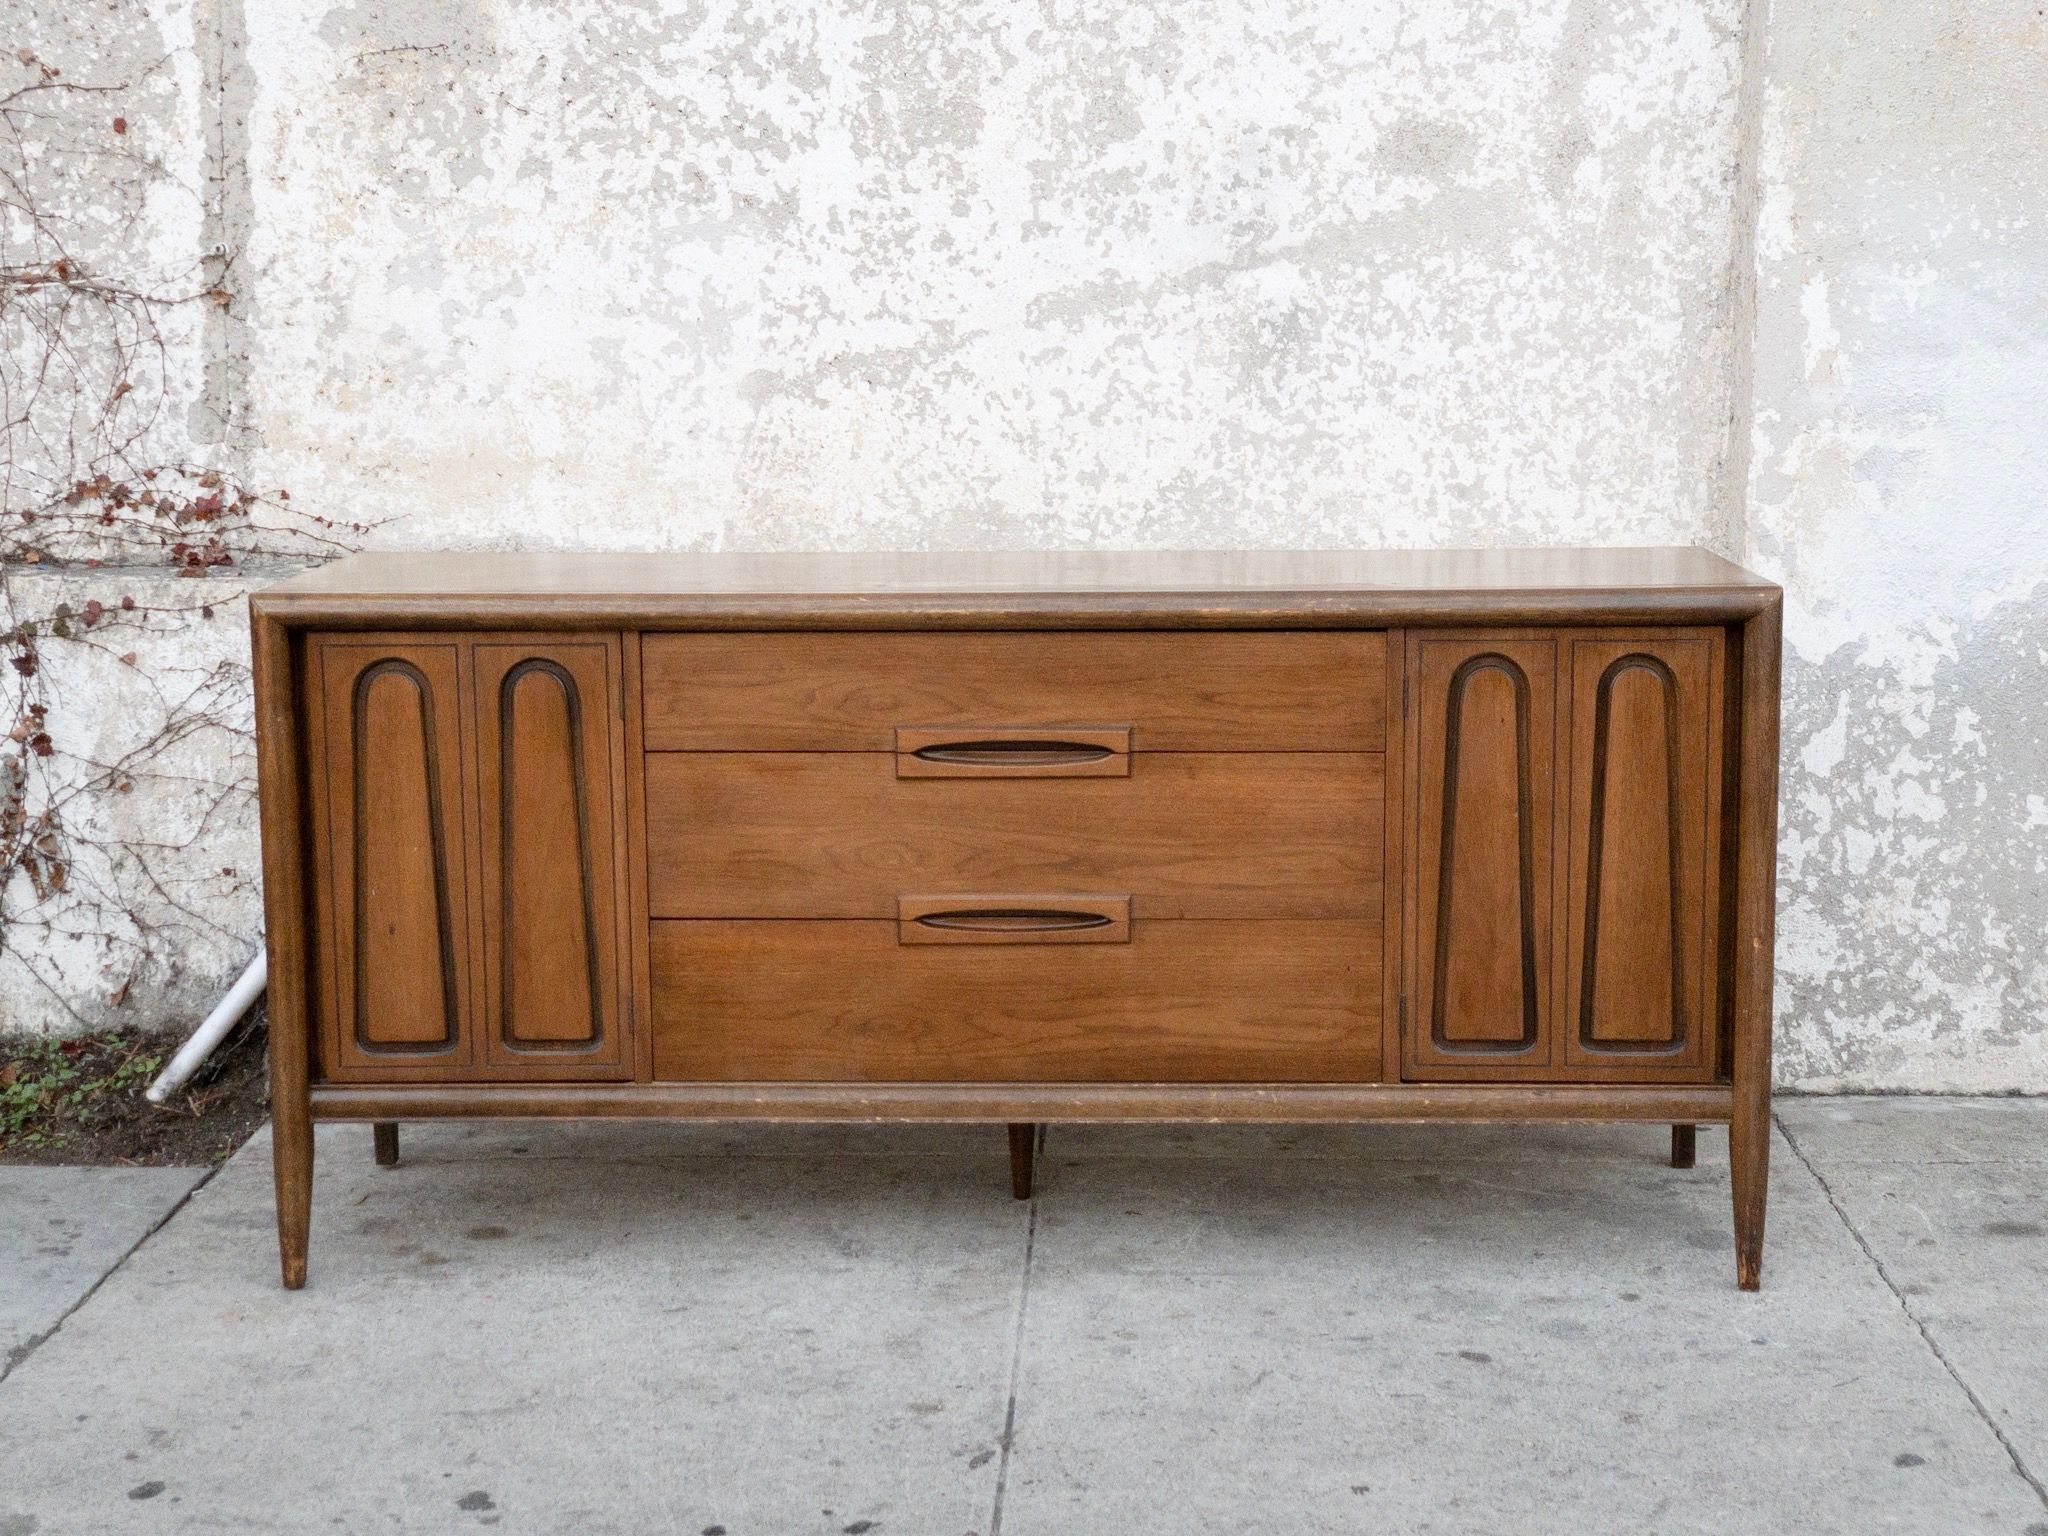 Vintage Bassett Credenza | Another New Place In 2019 Inside Latest Candide Wood Credenzas (View 6 of 20)